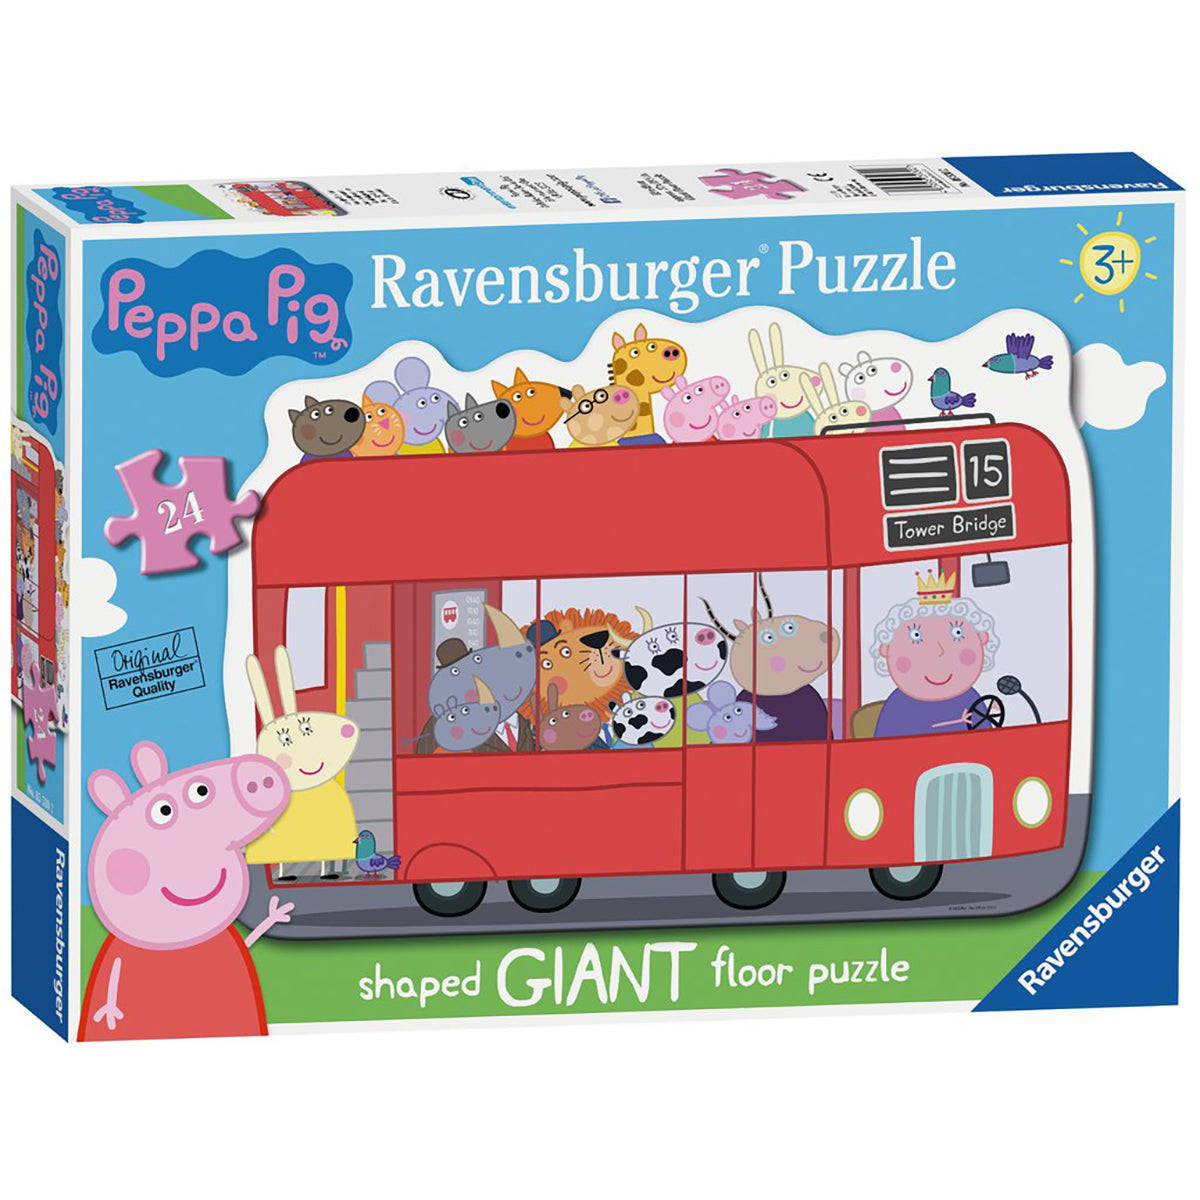 Peppa Pig Shaped Giant Floor Puzzle box